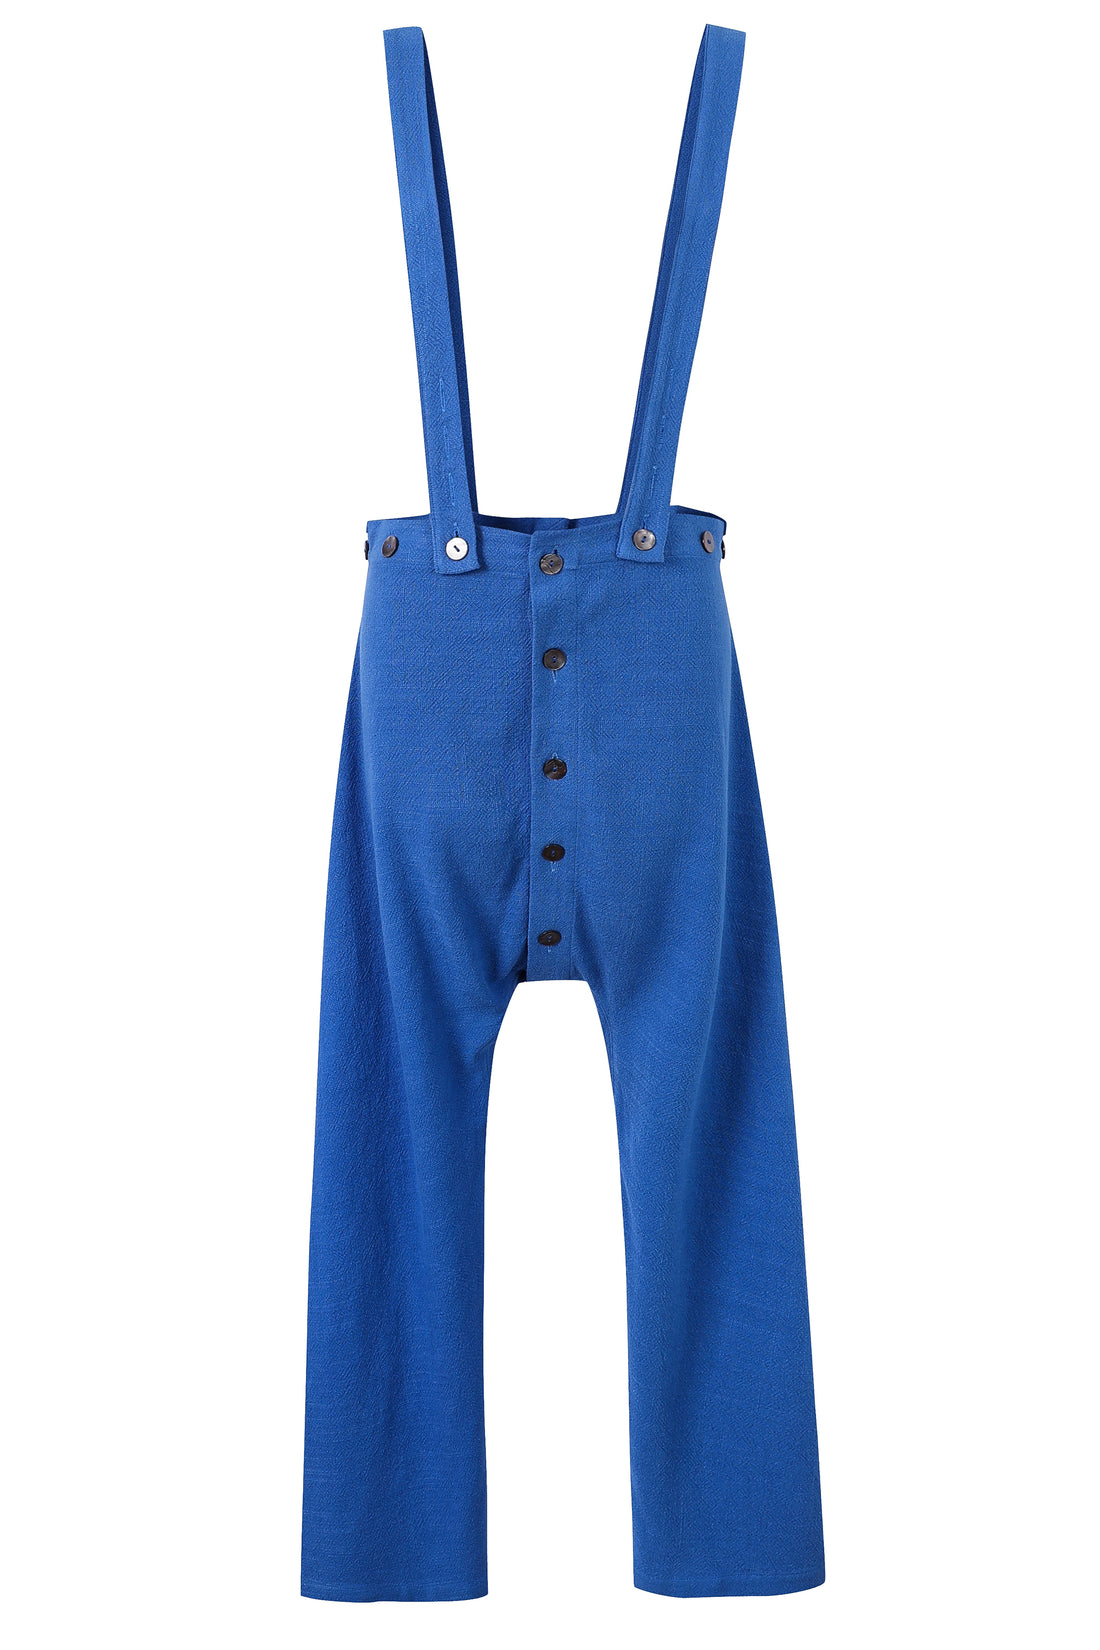 Jumpsuit of the Future French Blue